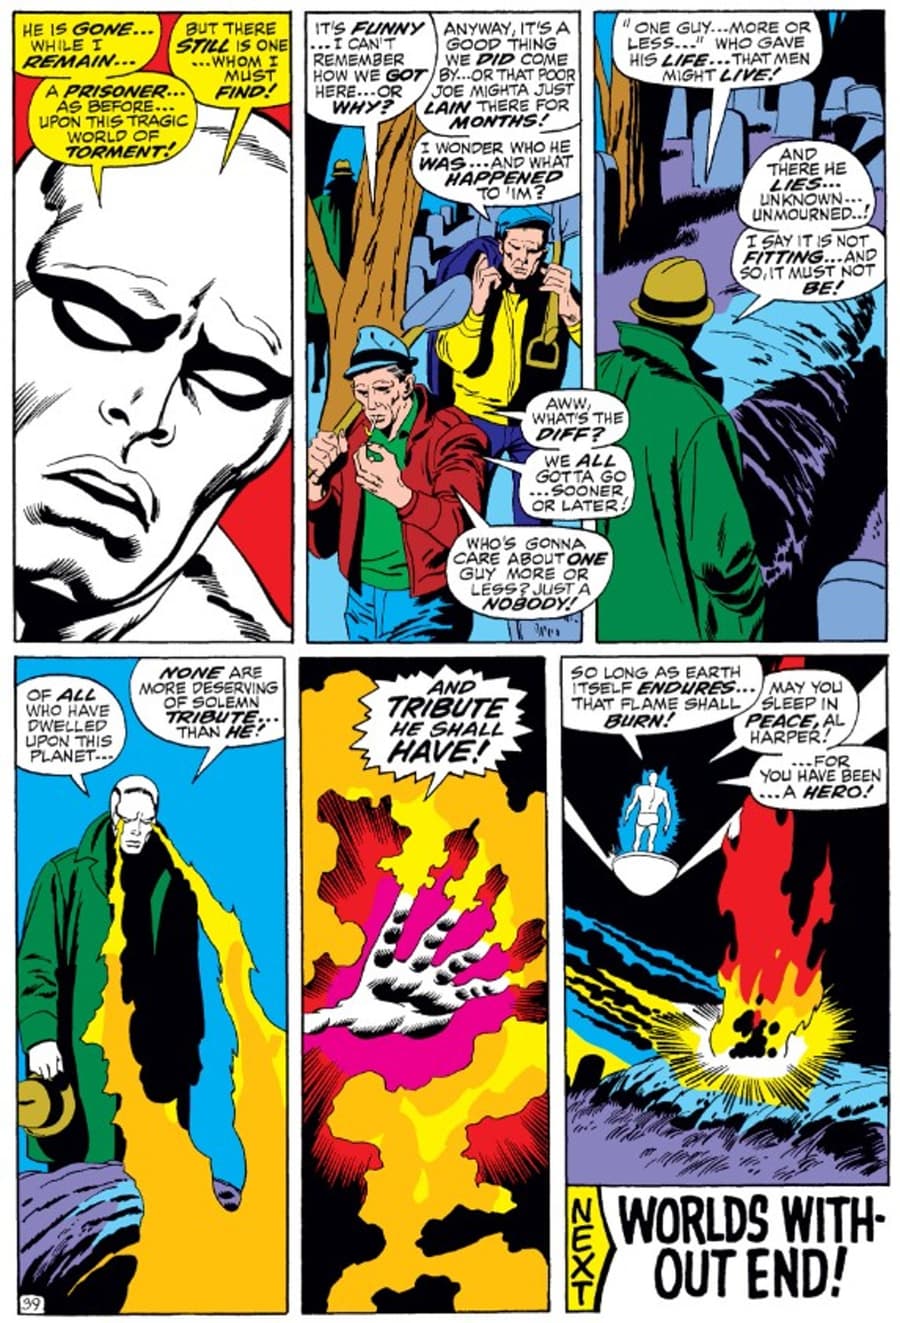 SILVER SURFER (1968) #5 page by Stan Lee, John Buscema, and Sal Buscema